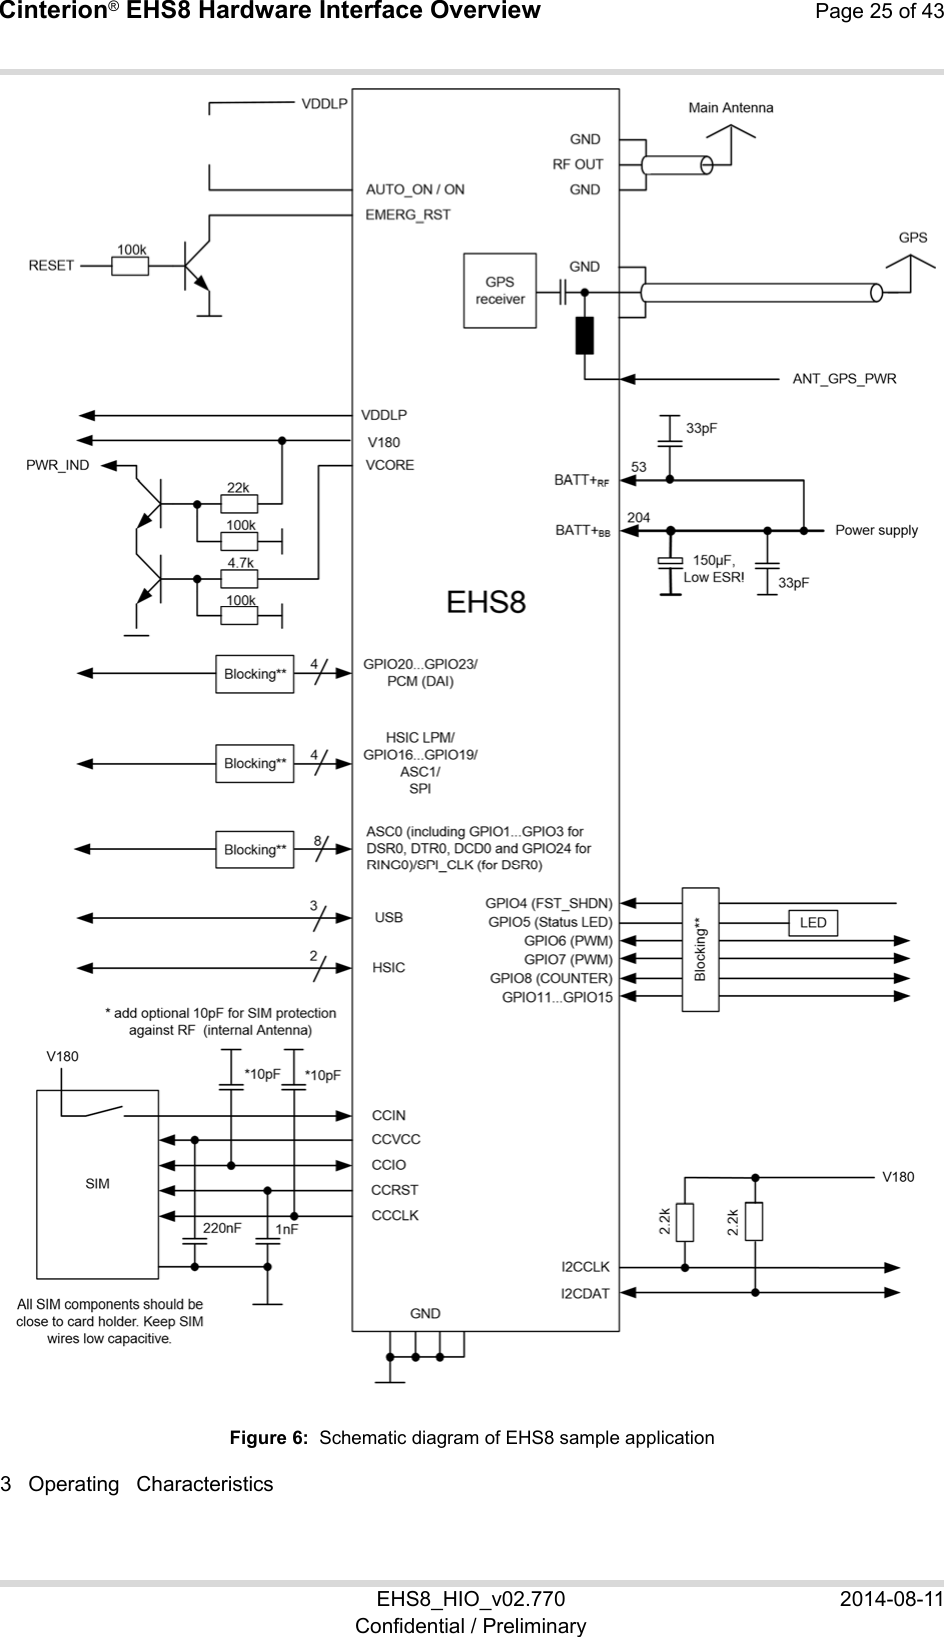 Cinterion® EHS8 Hardware Interface Overview Page 25 of 43 EHS8_HIO_v02.770  2014-08-11 Confidential / Preliminary 24  Figure 6:  Schematic diagram of EHS8 sample application 3  Operating  Characteristics 26 